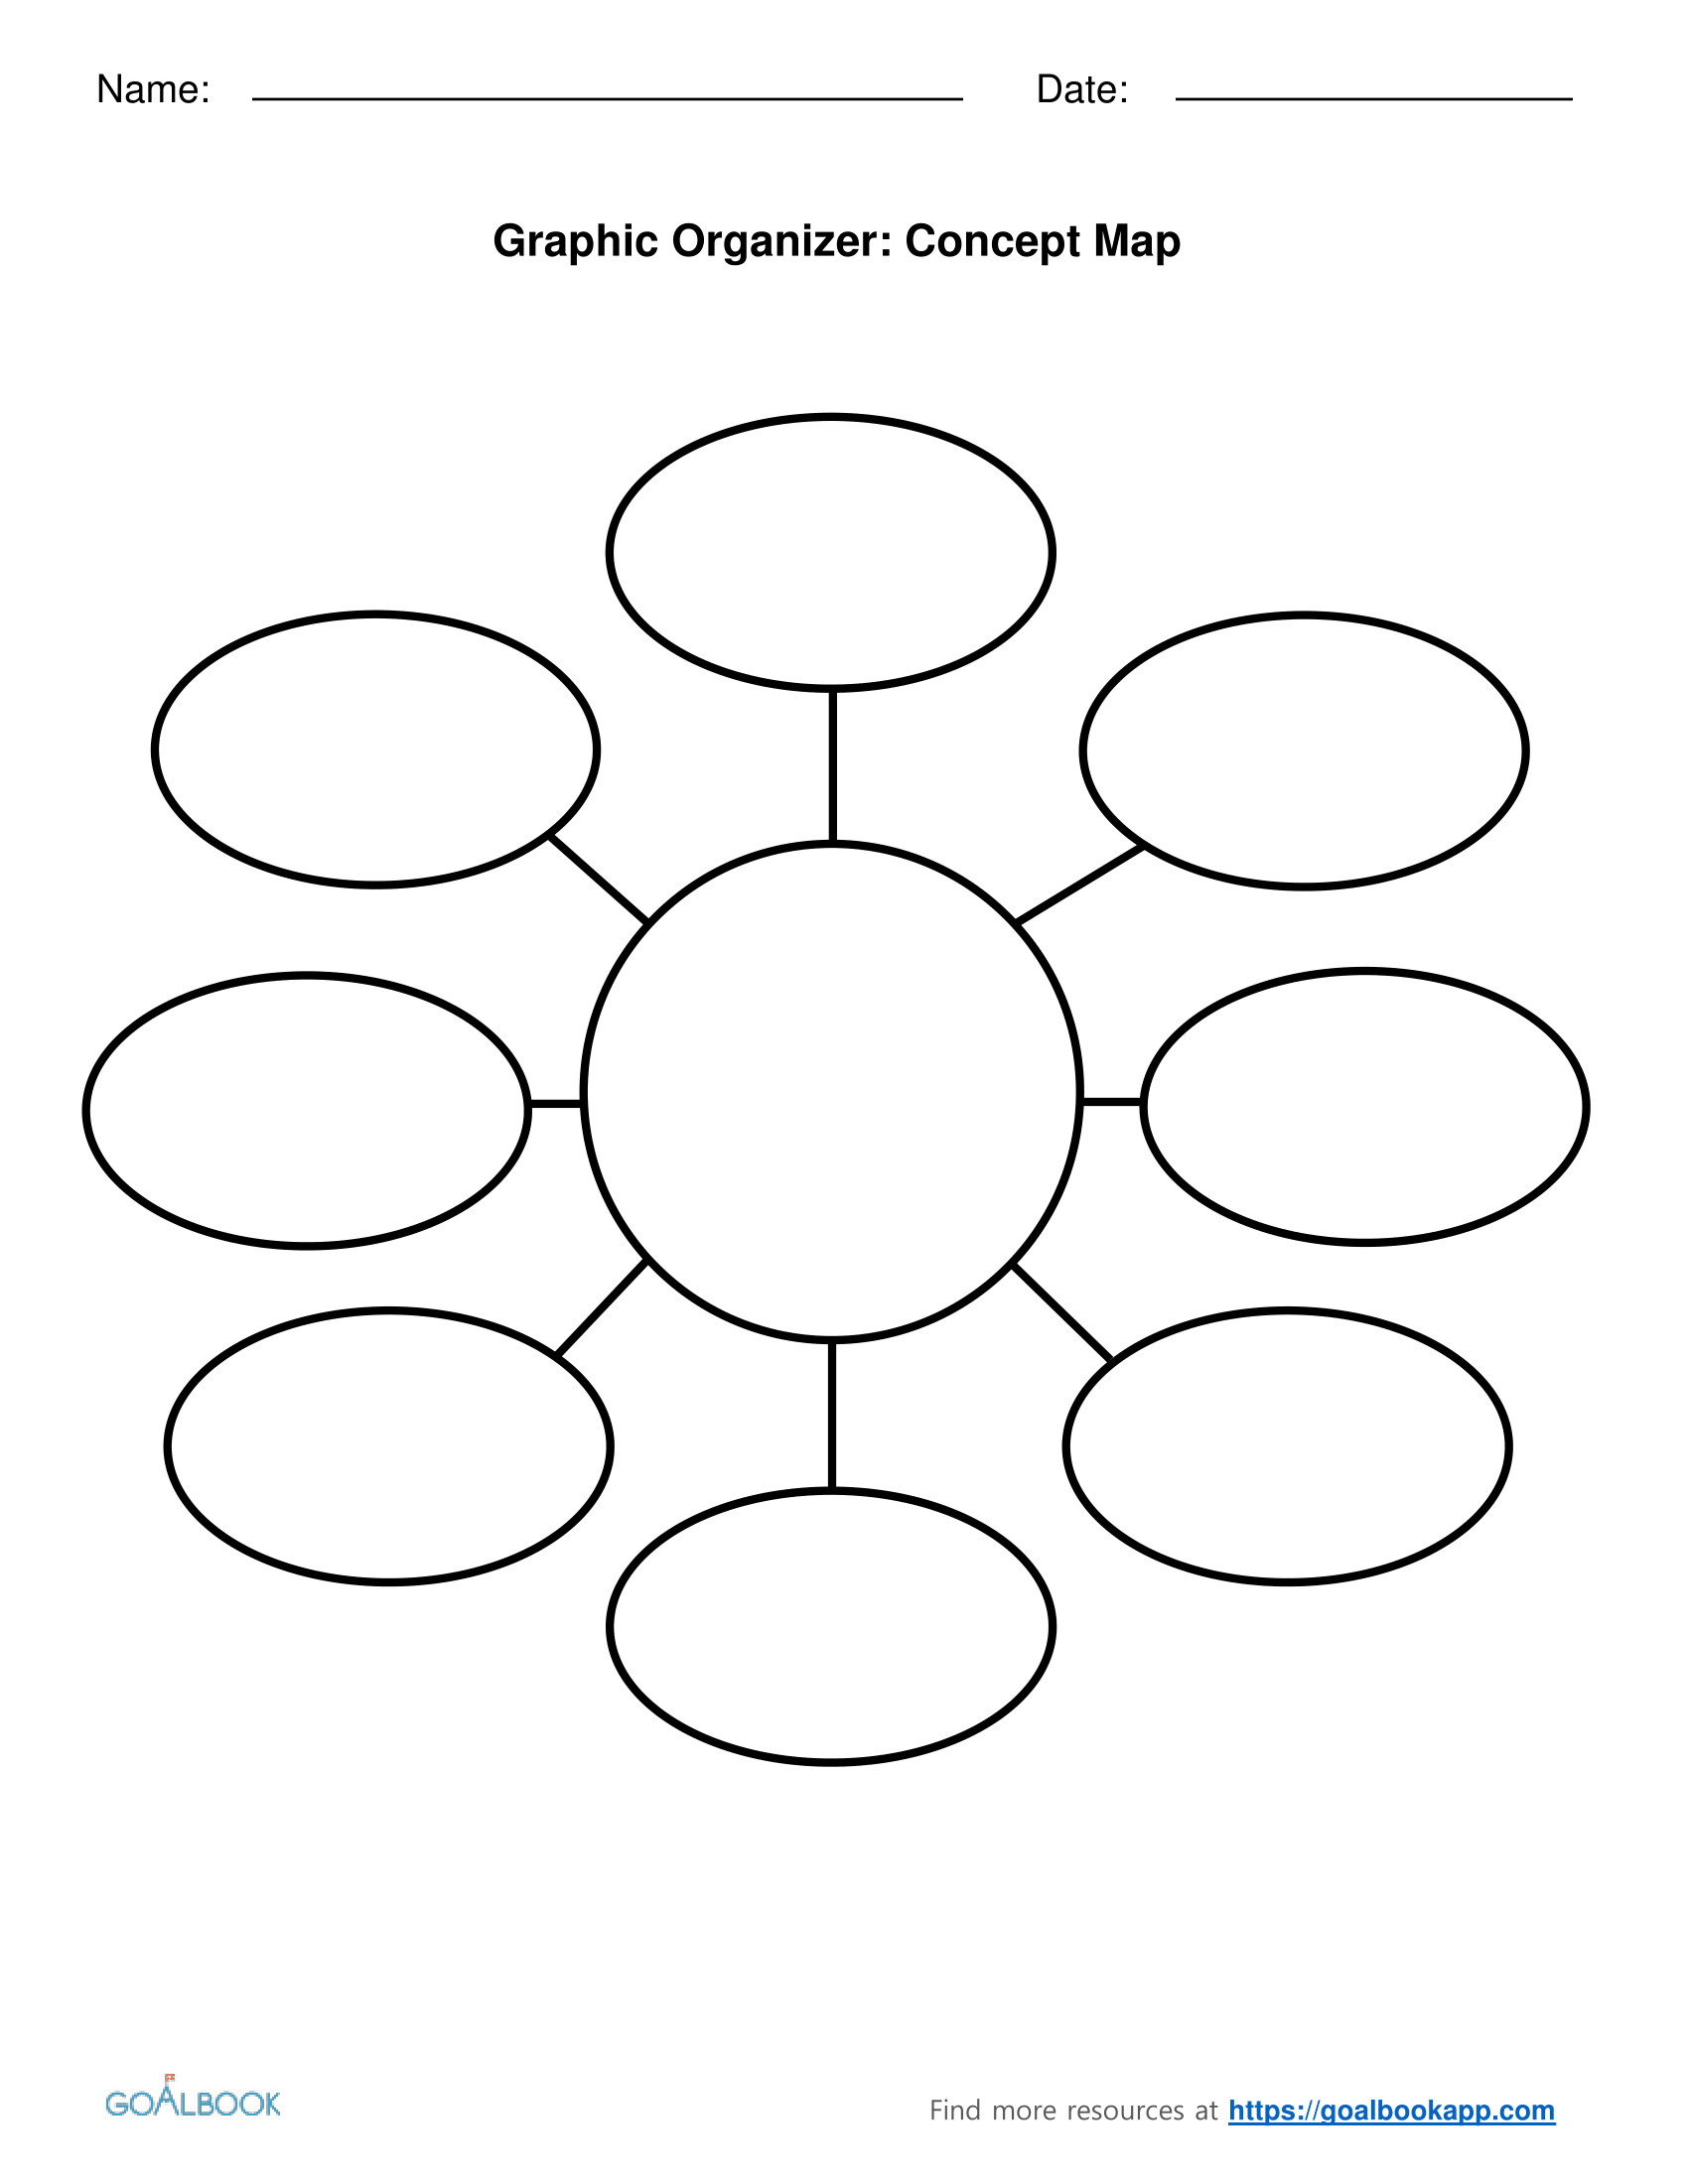 Graphic Organizers for Brainstorming